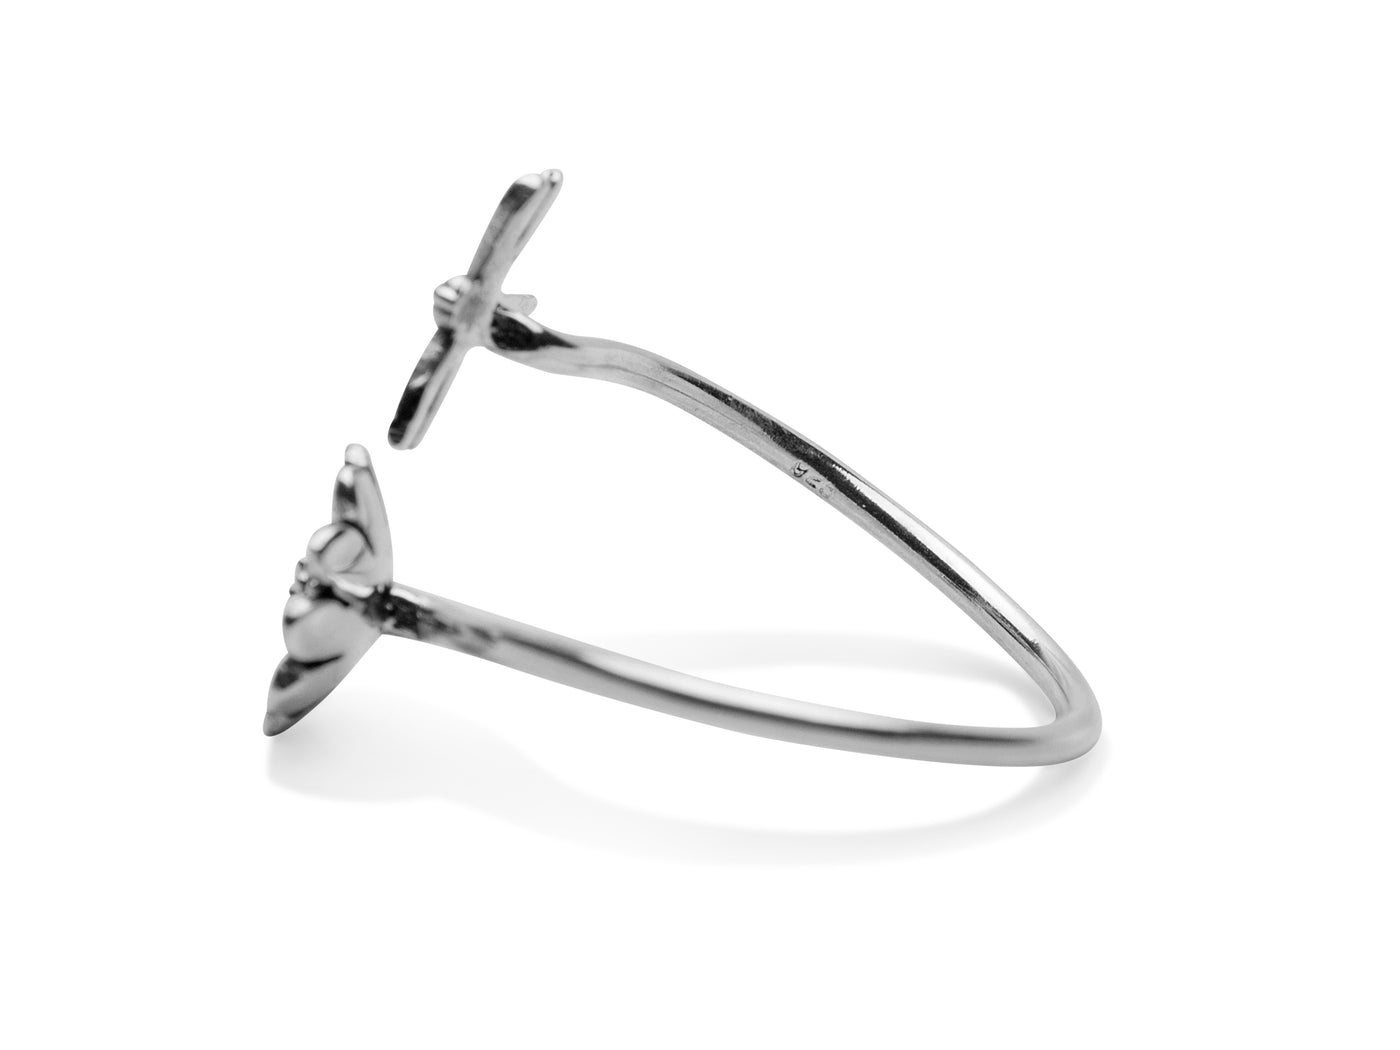 Dragonfly & Sunflower Silver Ring